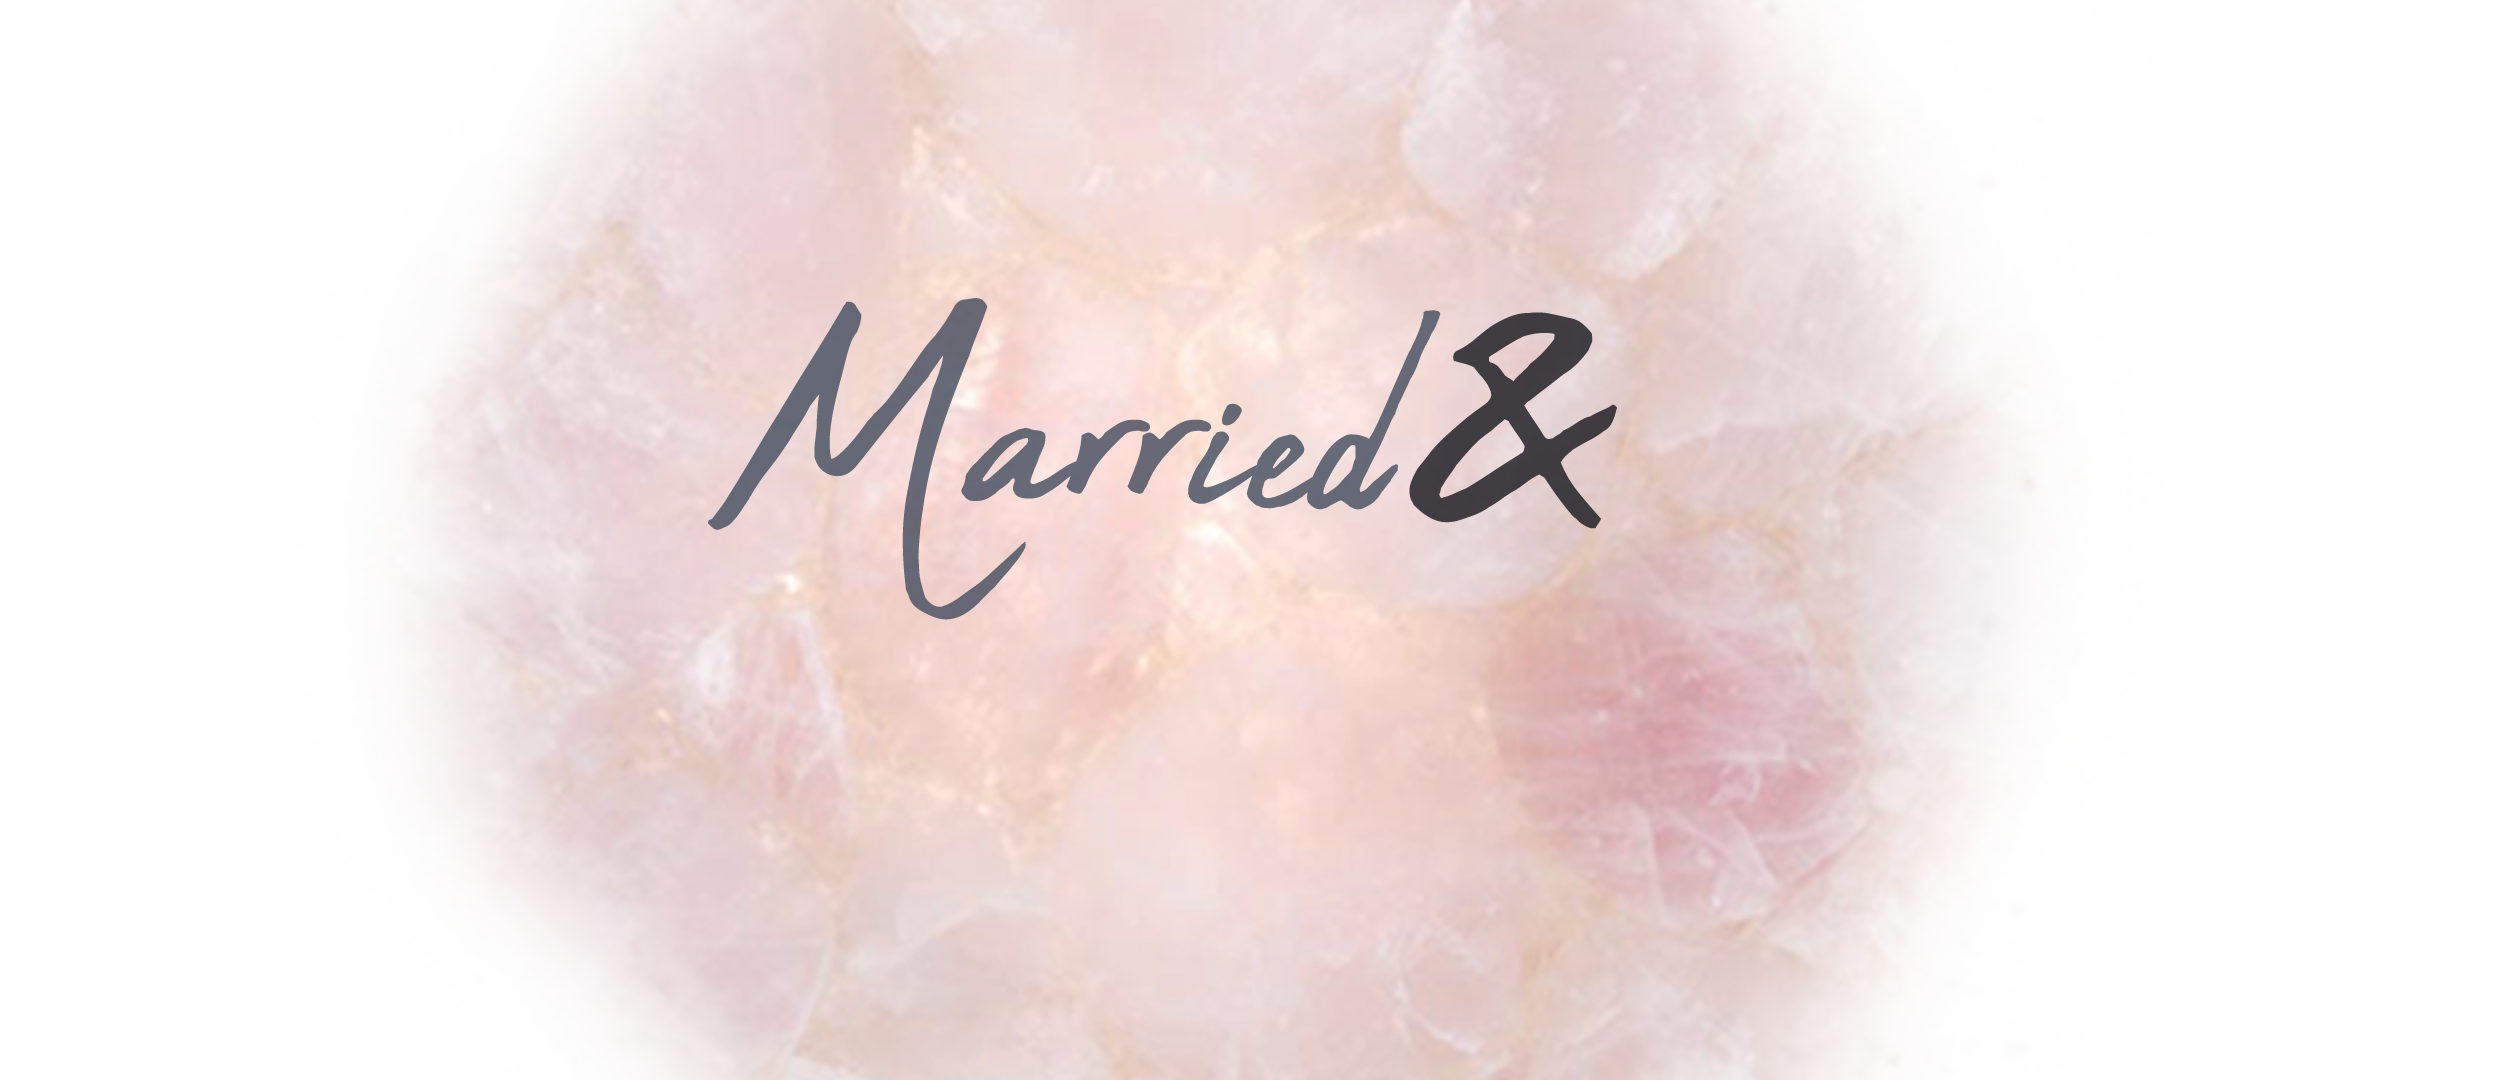 Married&